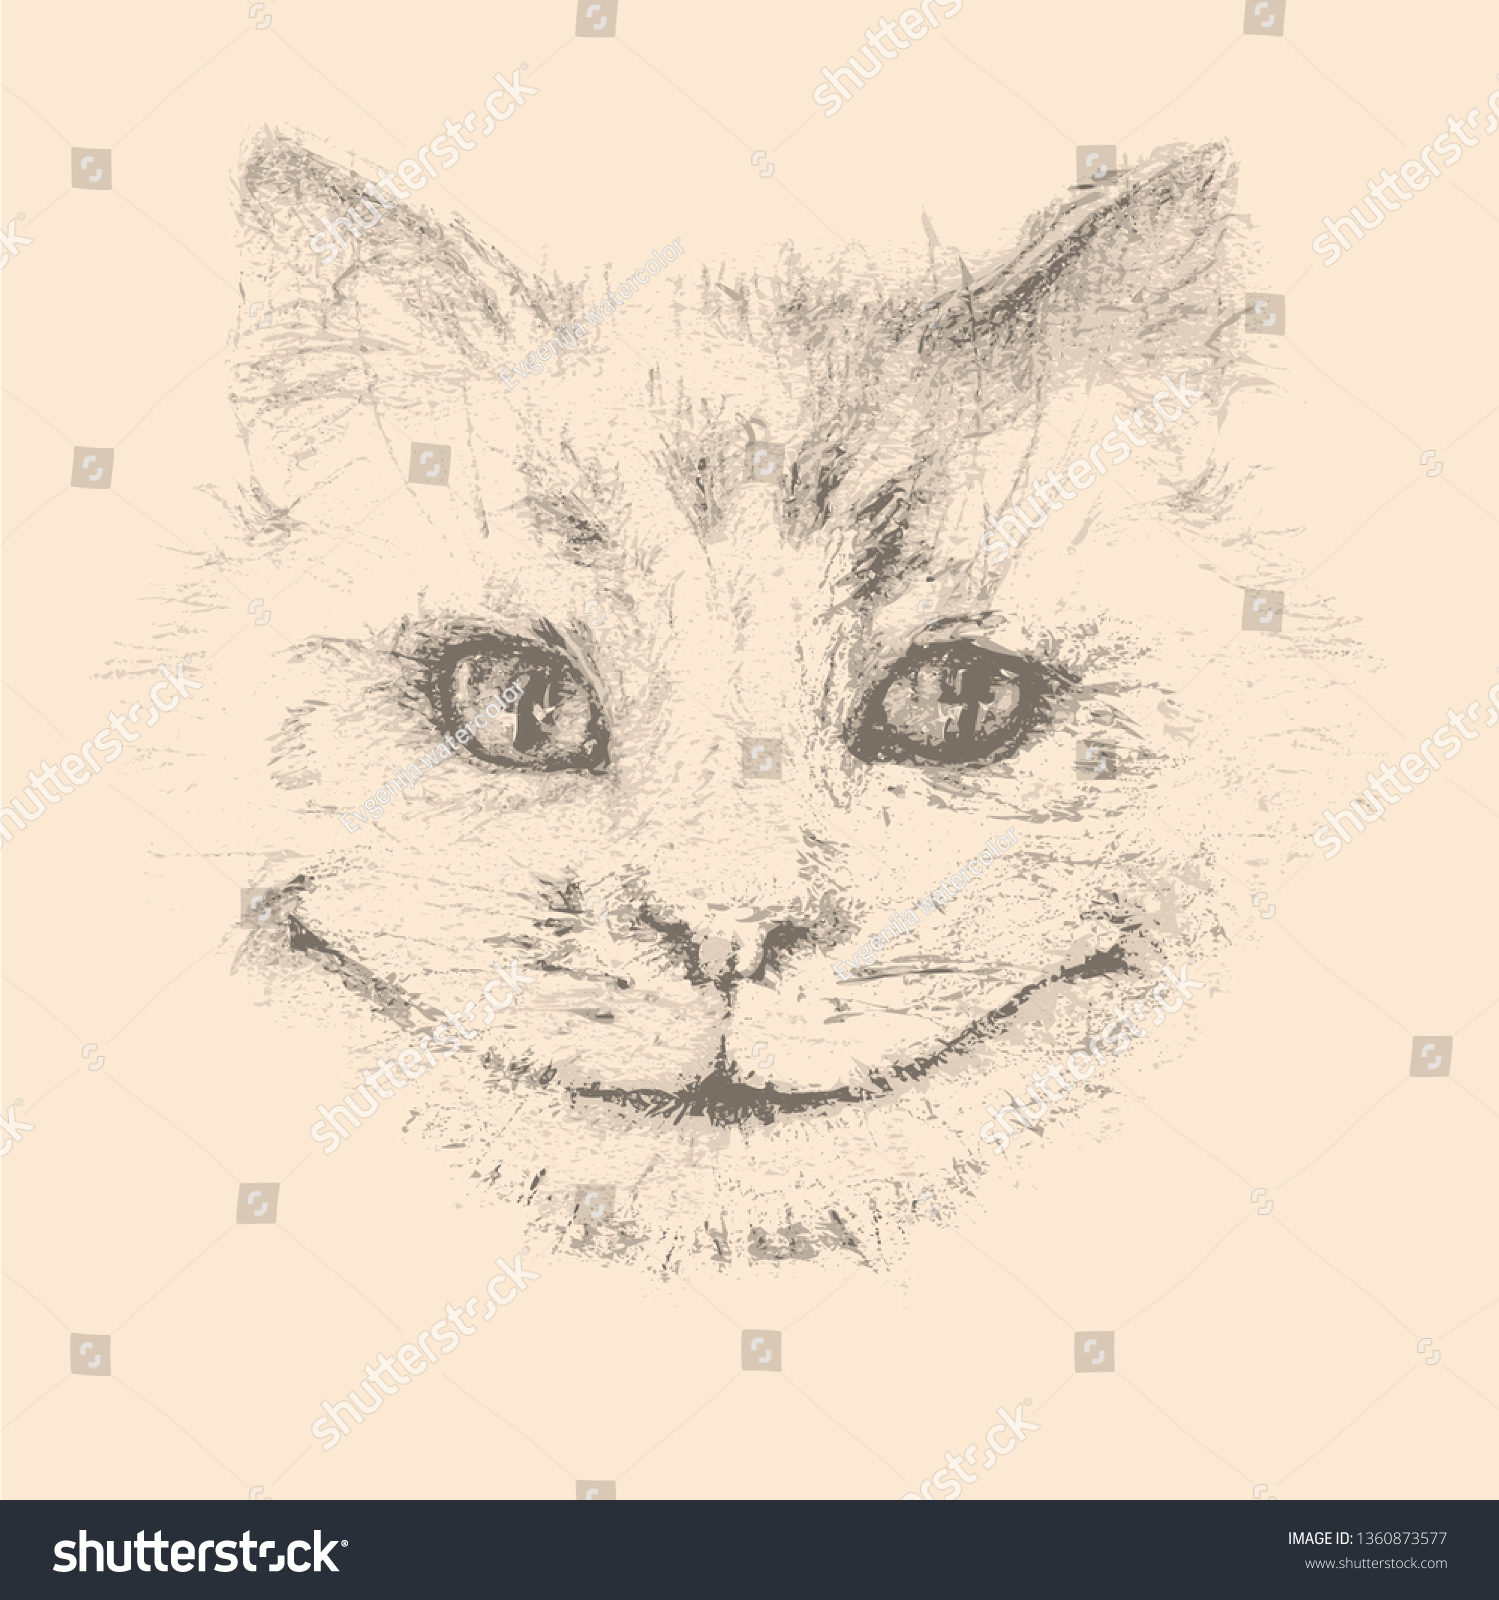 SVG of Cheshire cat smiles. Illustration for 